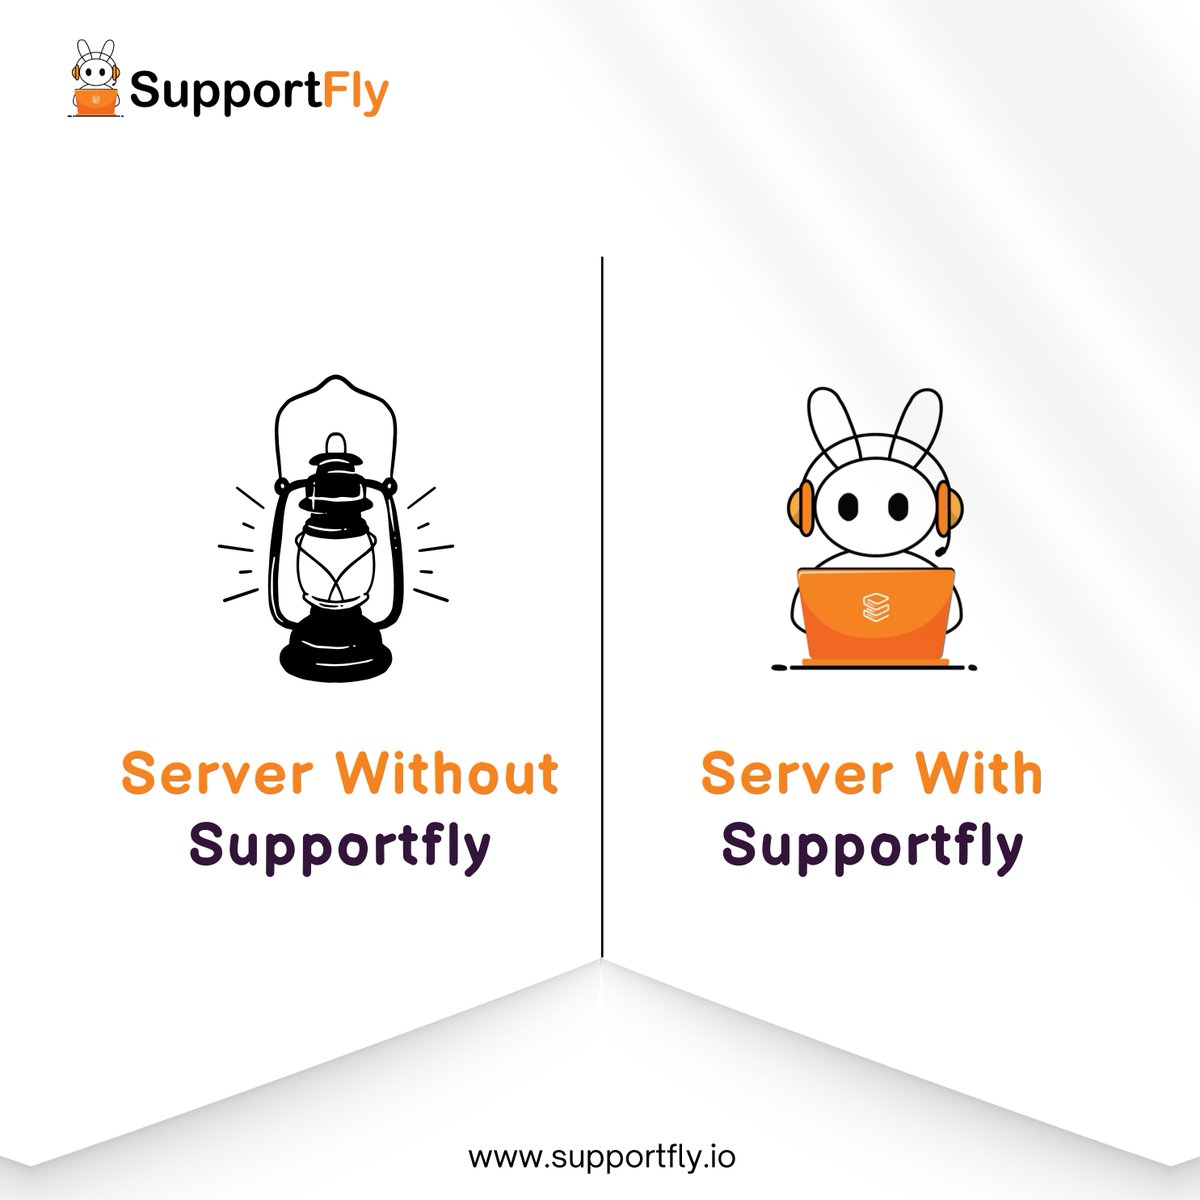 Before and After Supportfly: See the transformation in server efficiency and security when you choose our expert management services.
#servers #serversupport #dedicatedserver #cloudserver #linuxsupport #servermanagement #serversolution #serverprovider #serversolutions #supportfly